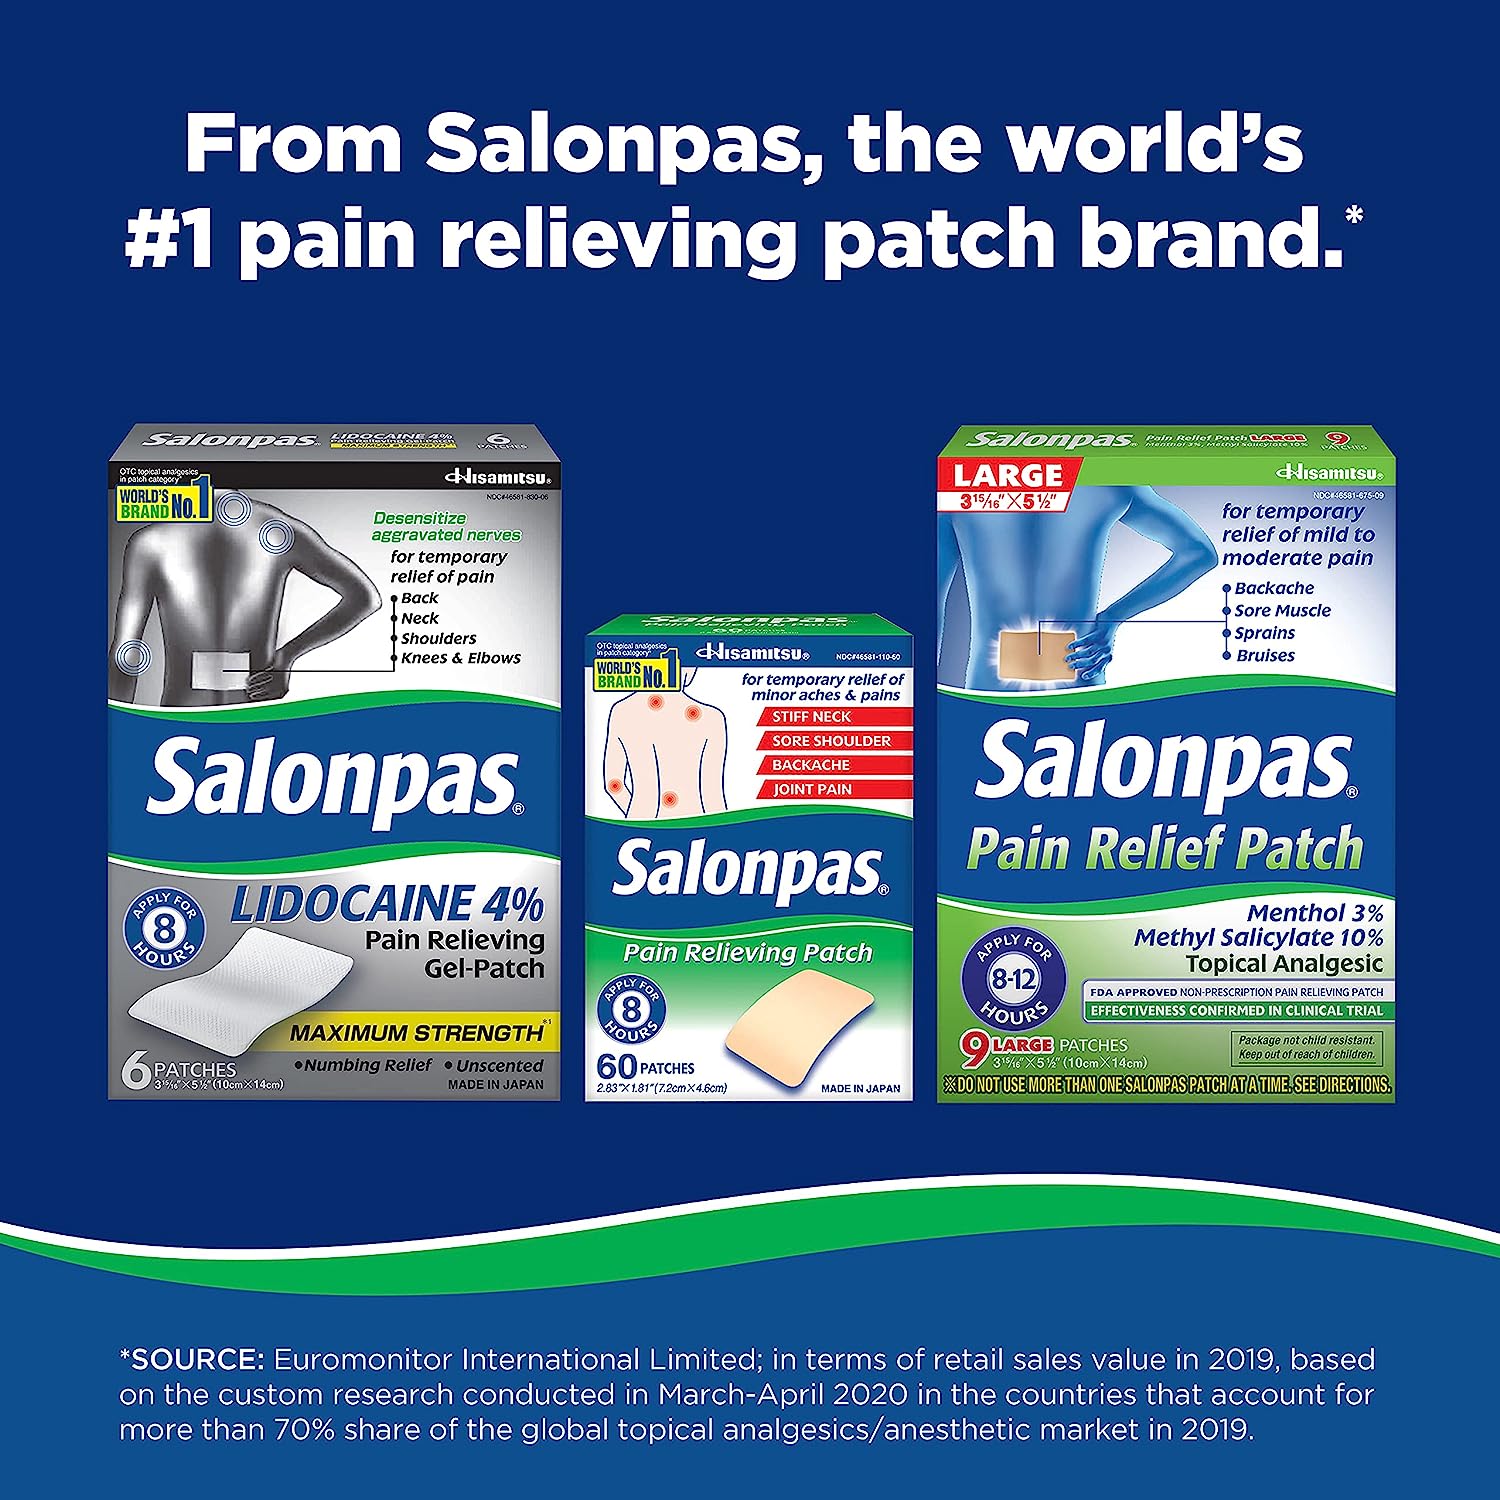 Salonpas Pain Relieving Patch, 8-Hour Pain Relief, 20 Patches - image 5 of 6